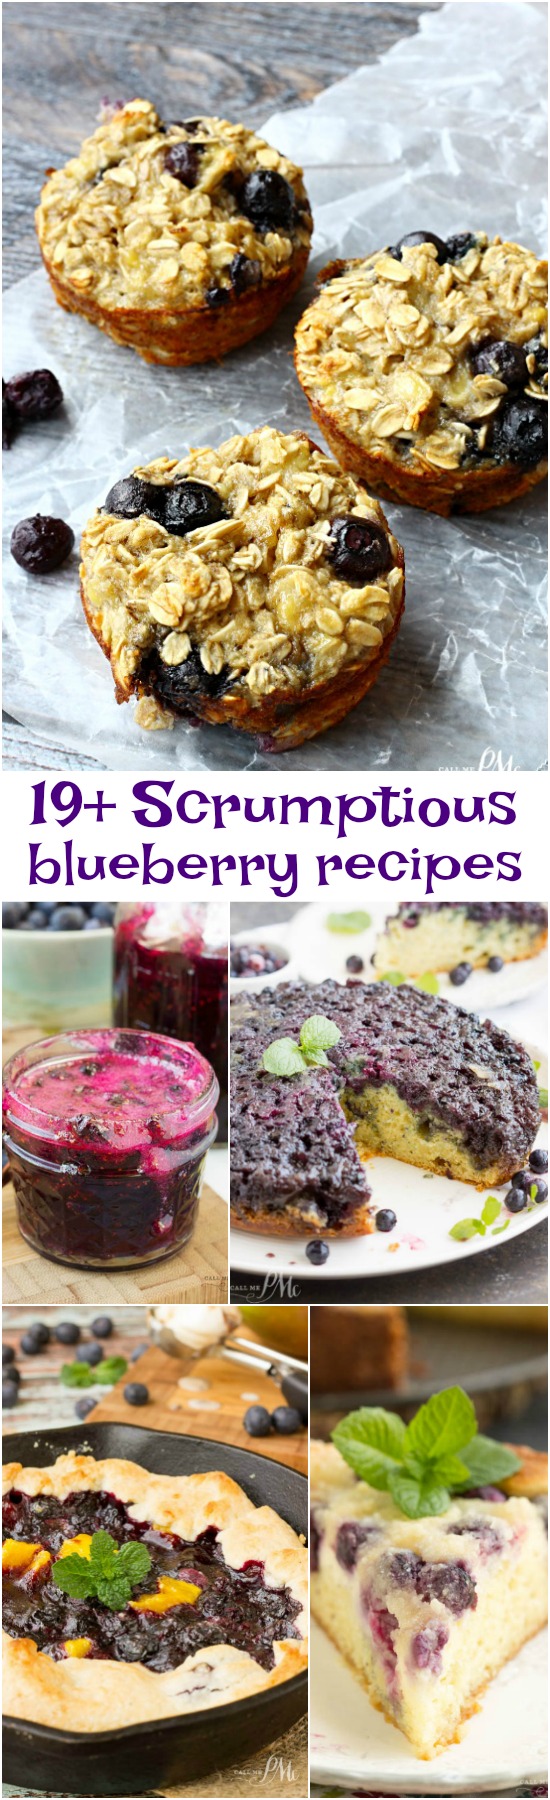 Calling all you blueberry lovers!  This fabulous assortment of recipes, 19 Scrumptious Blueberry Recipes, includes something for everyone’s individual taste. I put together this spectacular list and there is something for everyone to enjoy from sweet to savory.